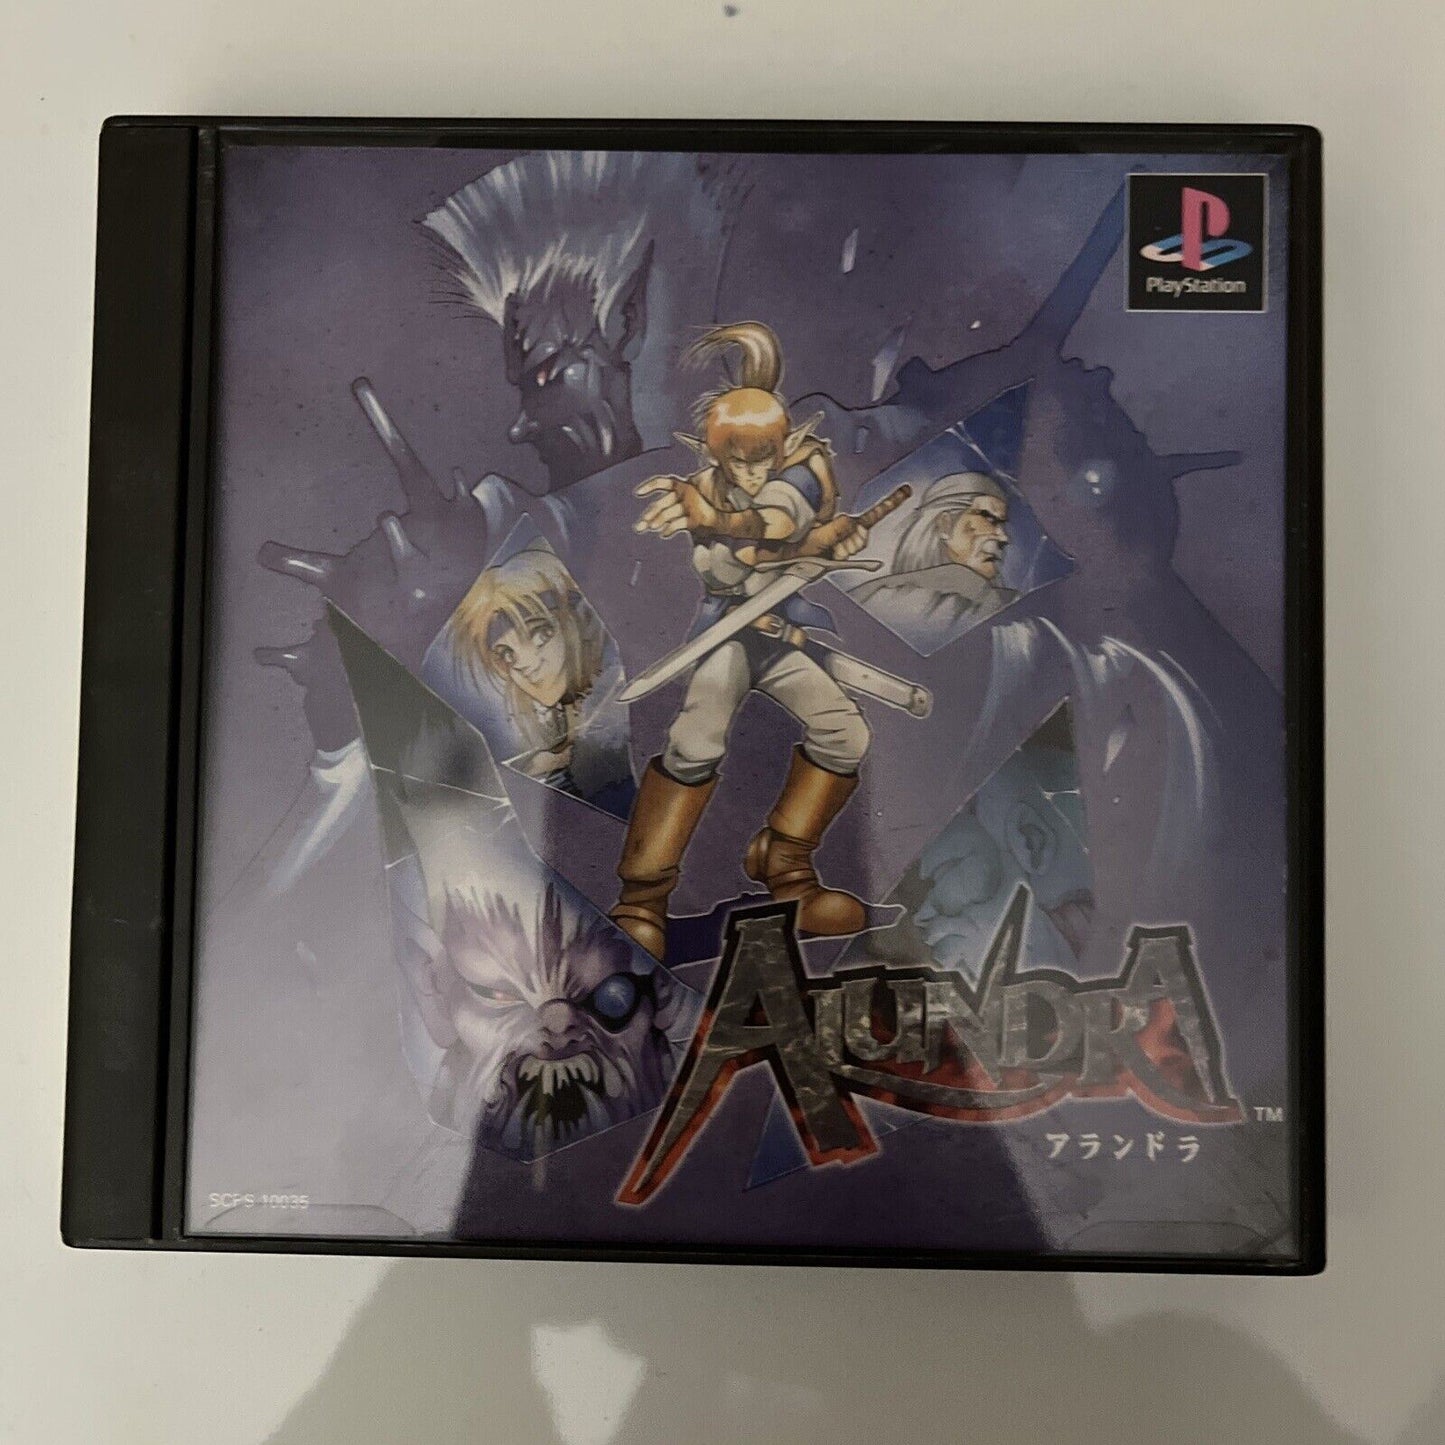 Alundra - Sony PlayStation PS1 NTSC-J JAPAN Action RPG 1997 Game